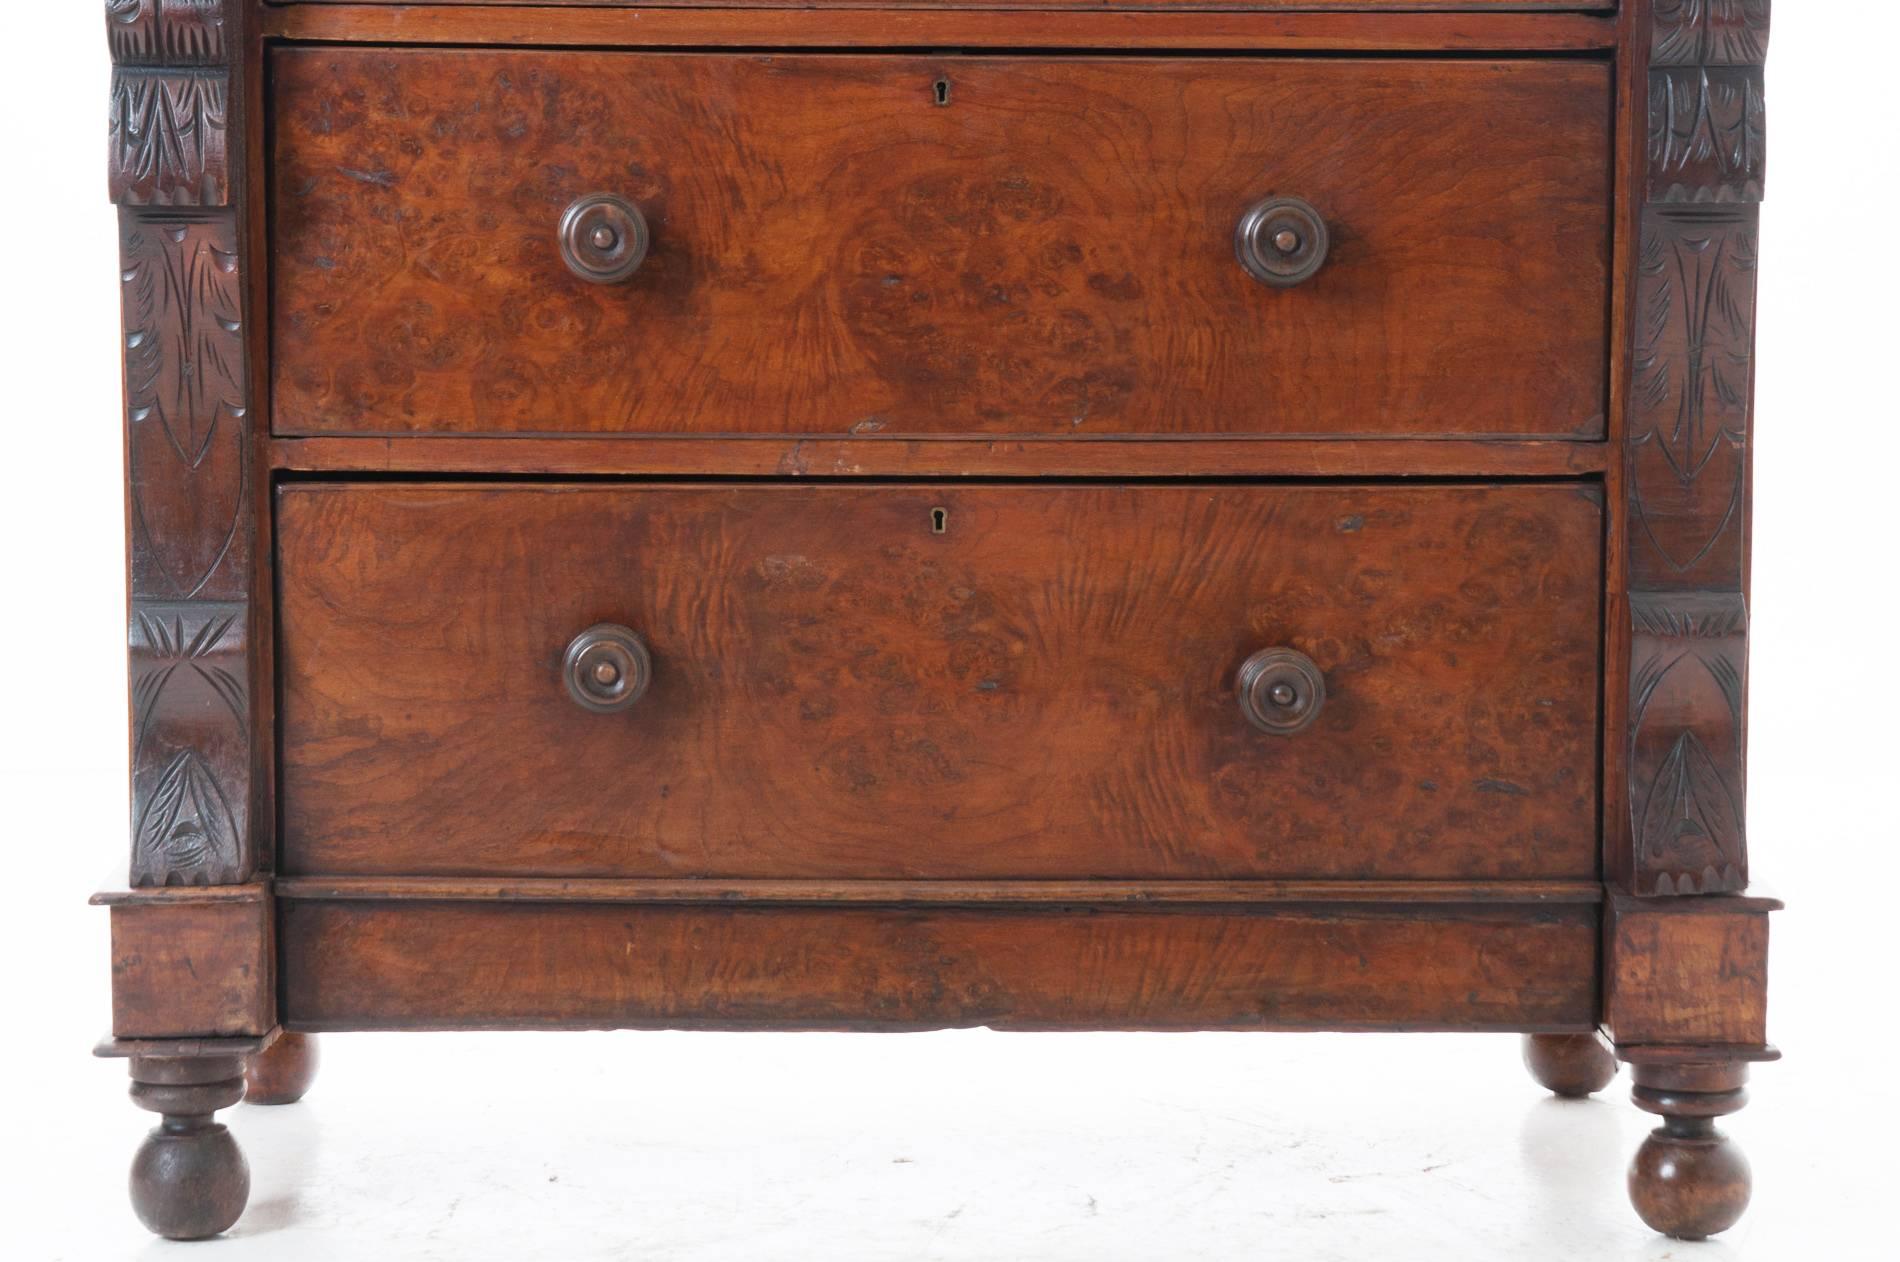 Scottish 19th Century Carved and Burled Mahogany Chest of Drawers 1